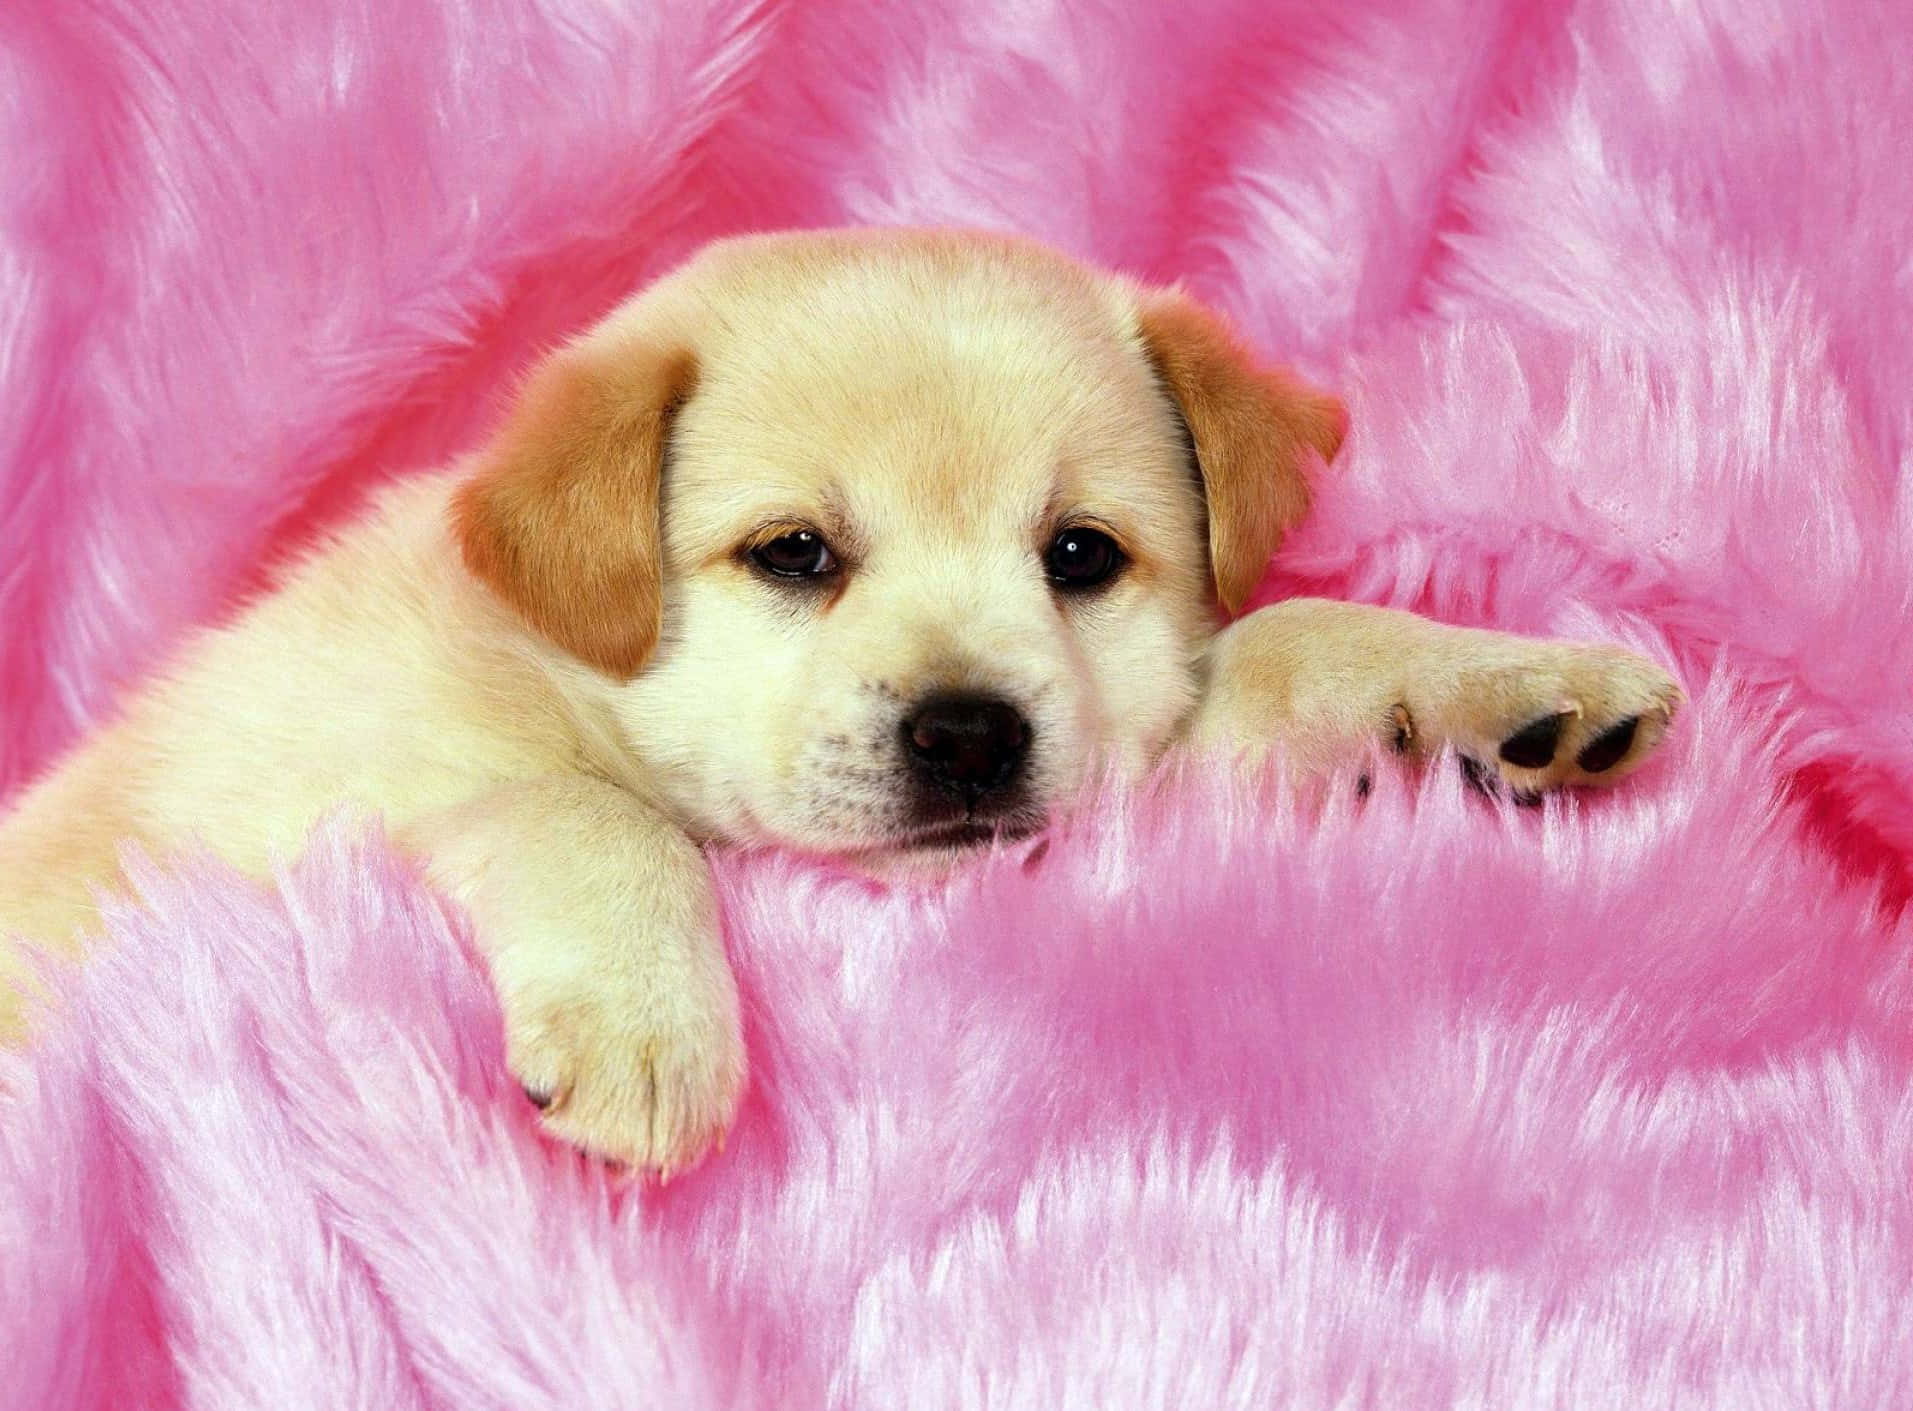 Two cute and cuddly pink puppies sharing a tender moment. Wallpaper